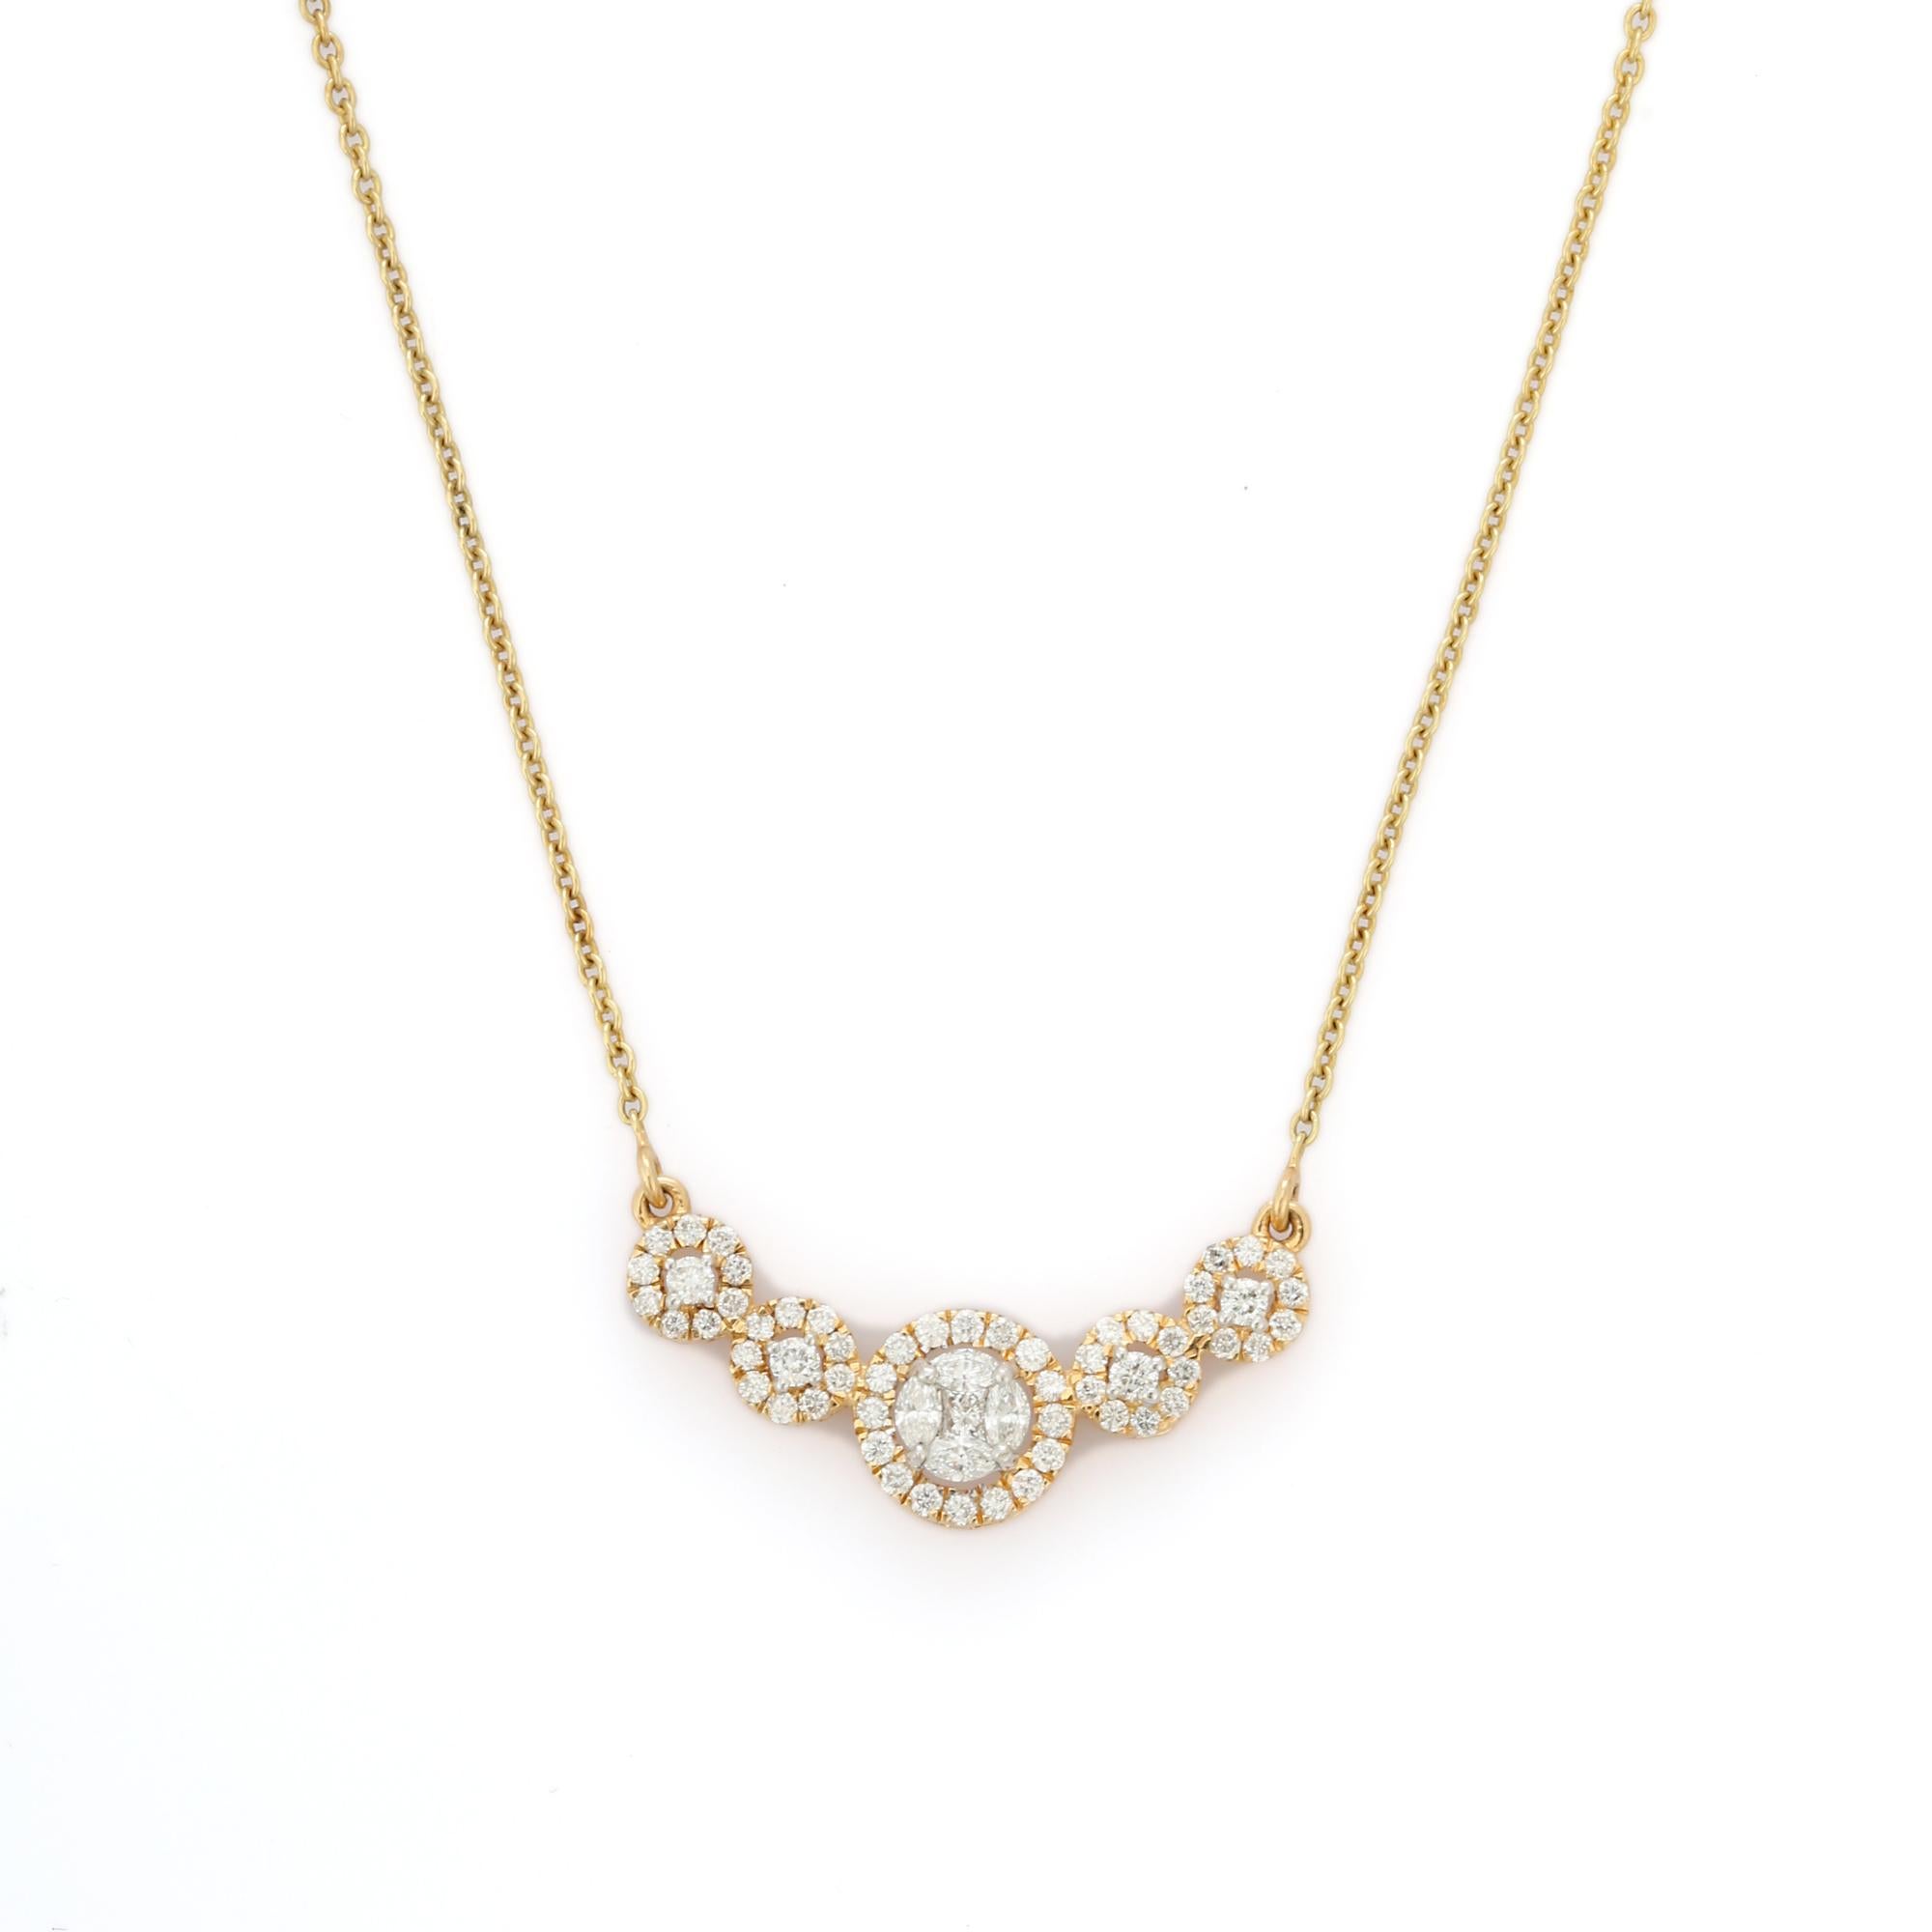 Diamond Necklace in 14K Gold studded with round cut diamonds.
Accessorize your look with this elegant diamond beaded necklace. This stunning piece of jewelry instantly elevates a casual look or dressy outfit. Comfortable and easy to wear, it is just